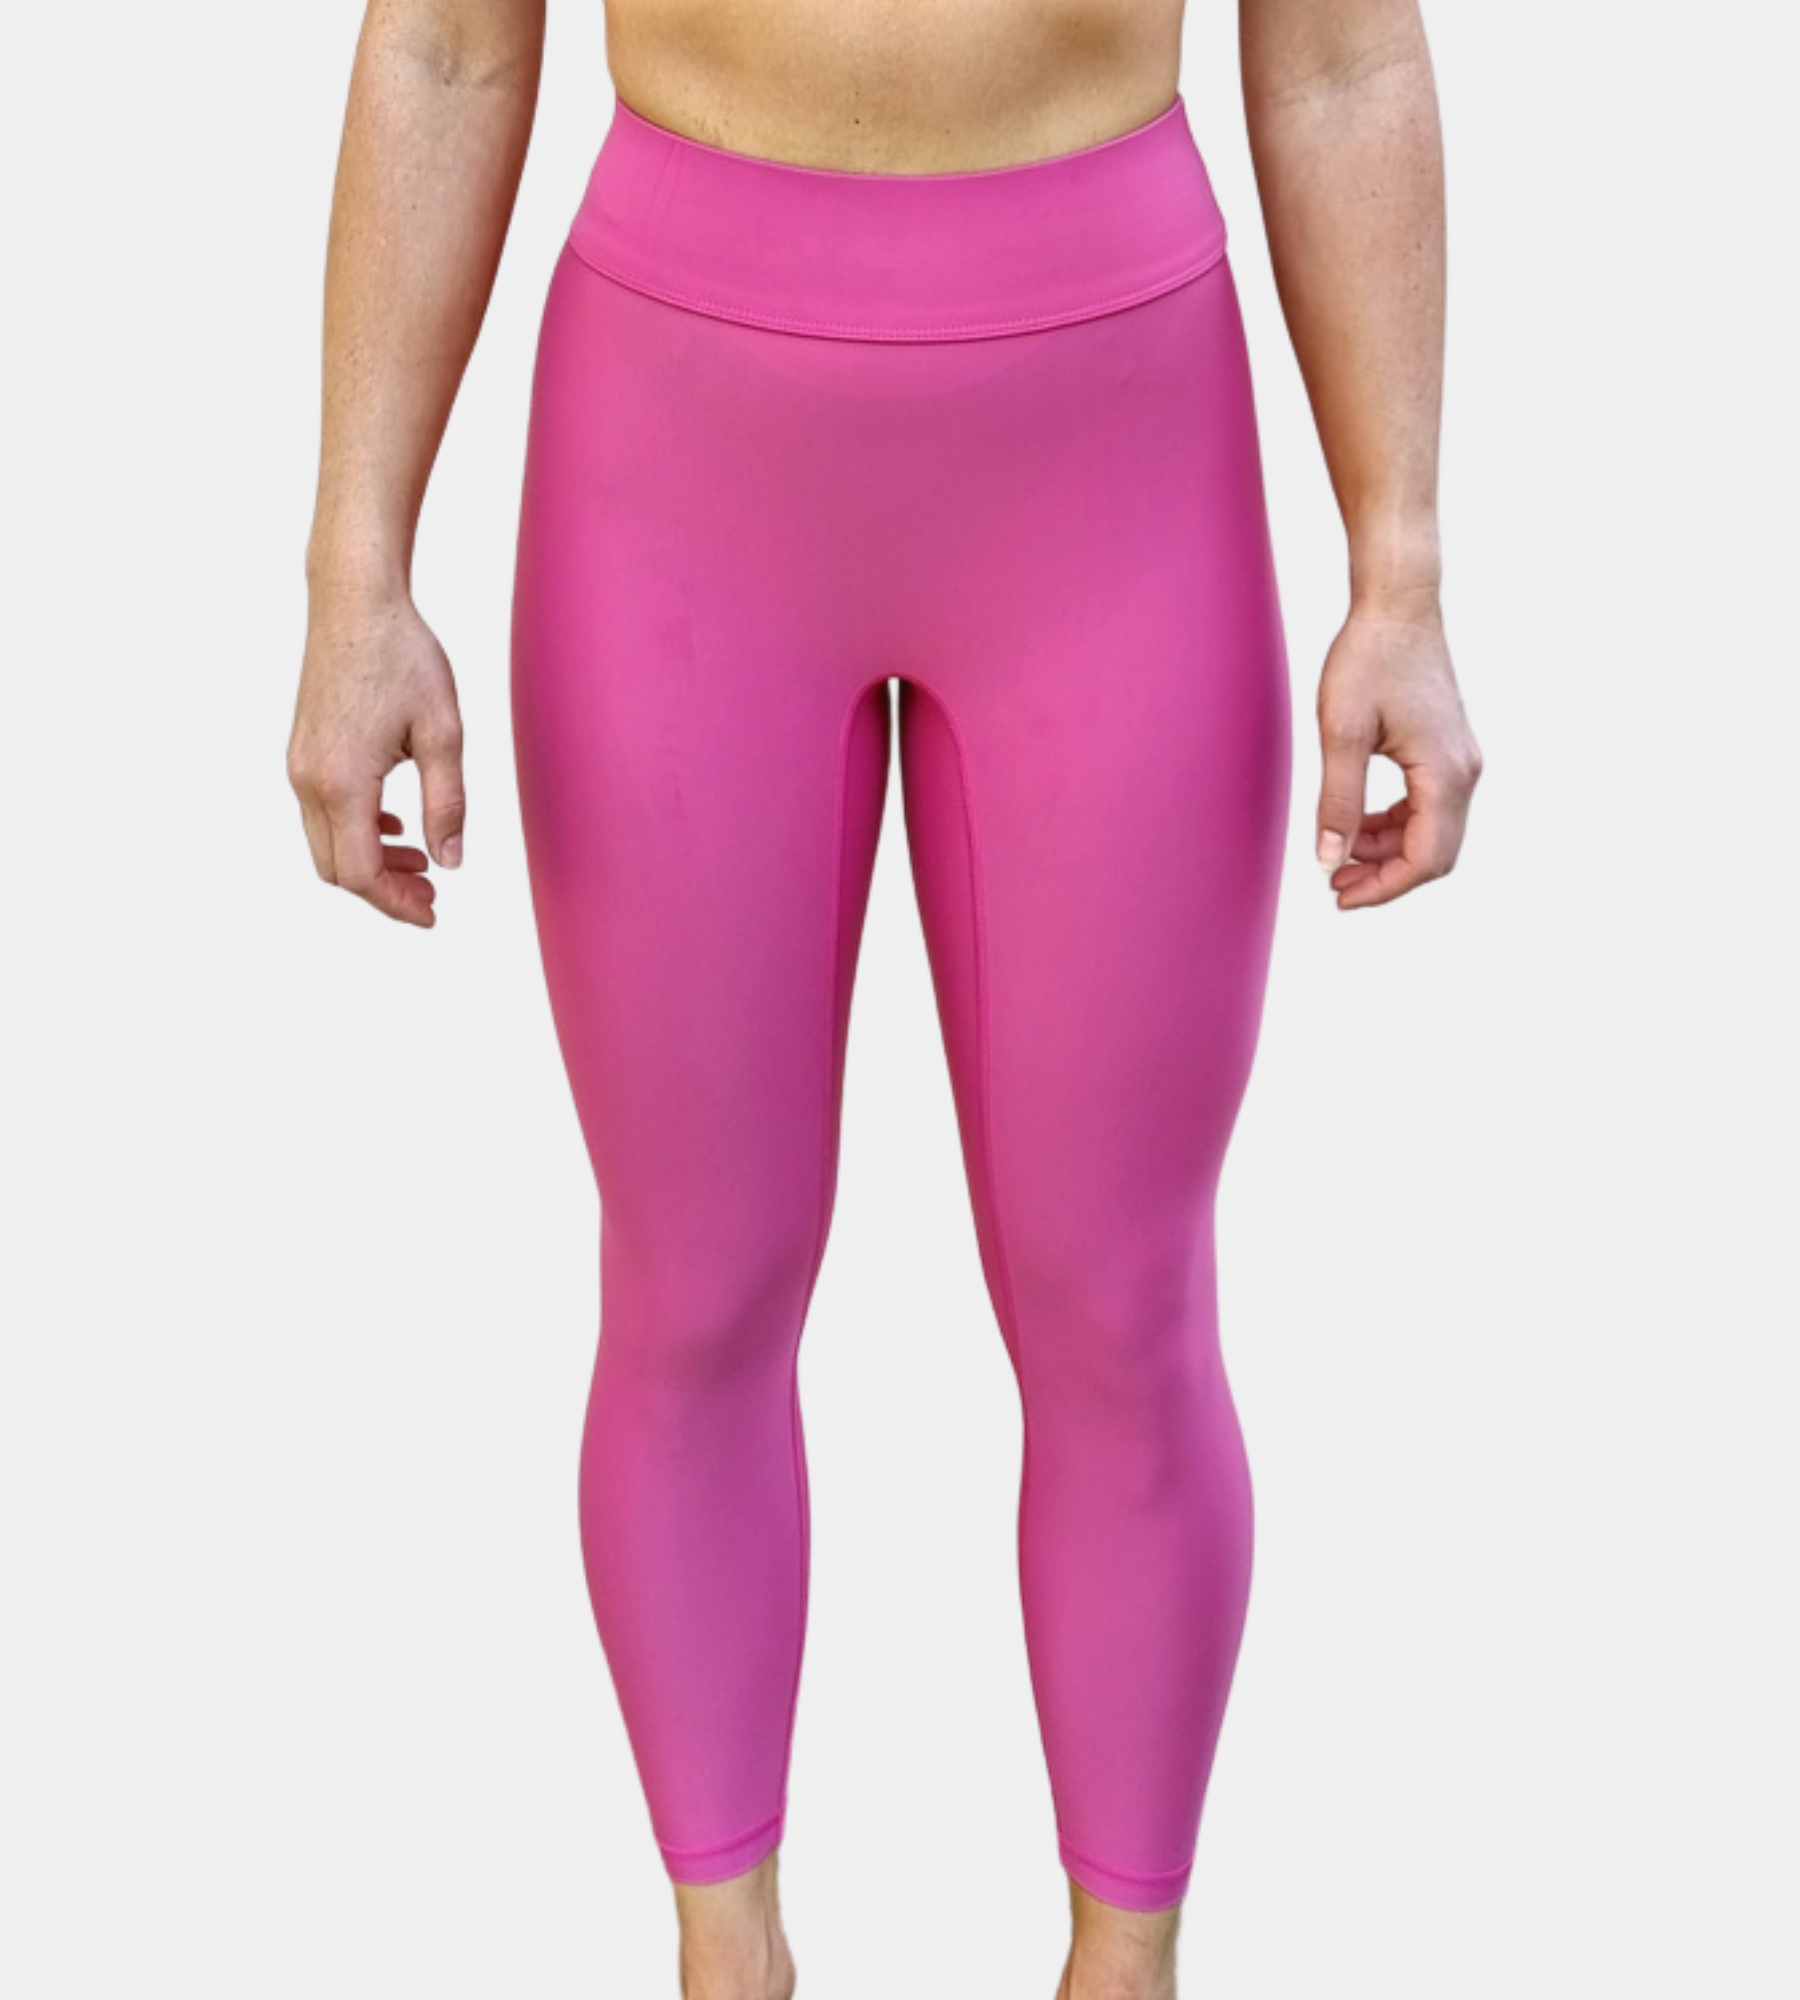 Women's Breathable Tights, Women's Pink Tights, Salti People